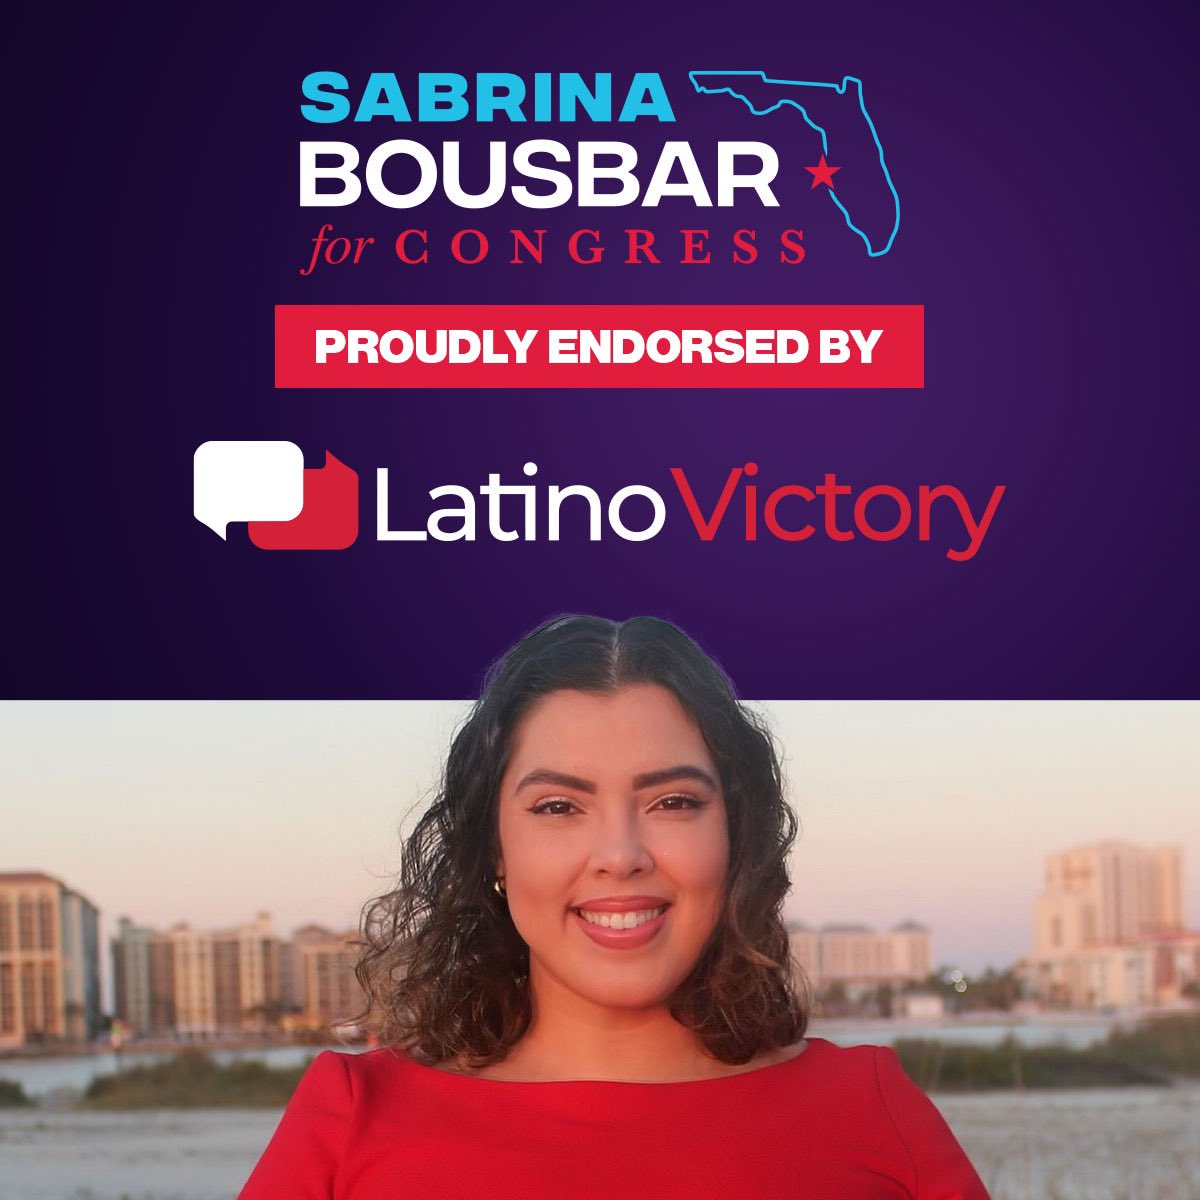 “Sabrina has the grit and passion for serving others that we need in Congress during these challenging times. Her experience in preparedness and recovery has been invaluable to our country and she will continue to serve her community by advocating for abortion rights, and